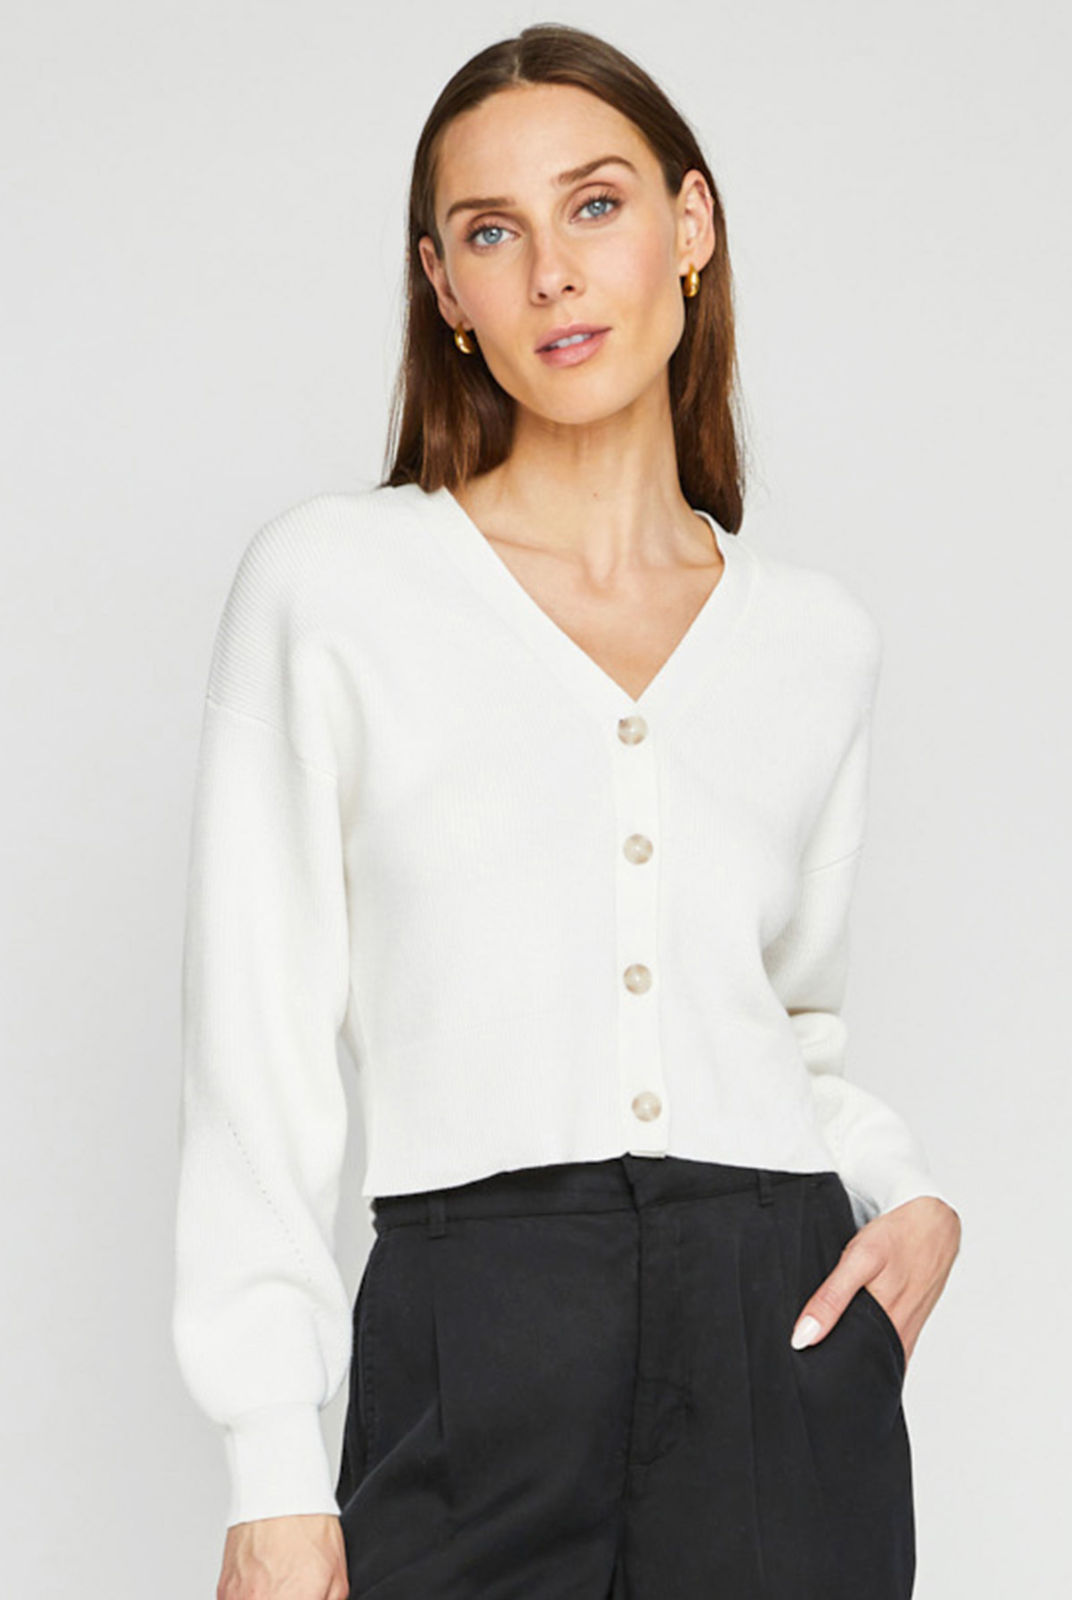 Gentle Fawn Orville Sweater - White. The Orville cardigan is made of a super soft heathered yarn. Wear it as is or layered over a tank for an effortless look.